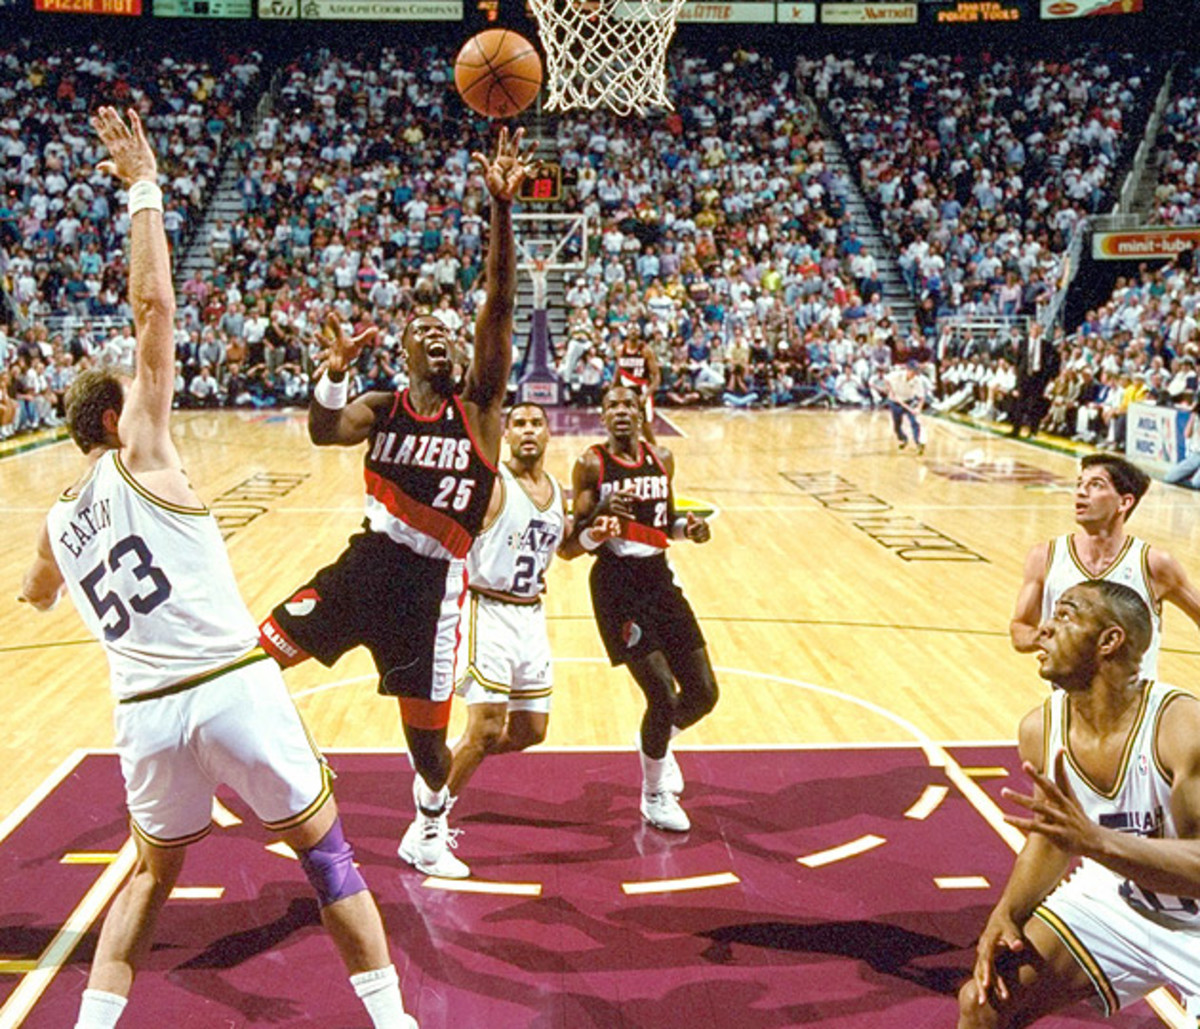 Jerome Kersey (25), in action during Game 6 of the Western Conference Finals, averaged 19.5 points and seven rebounds per game to help secure a 4-2 series win against the Utah Jazz.